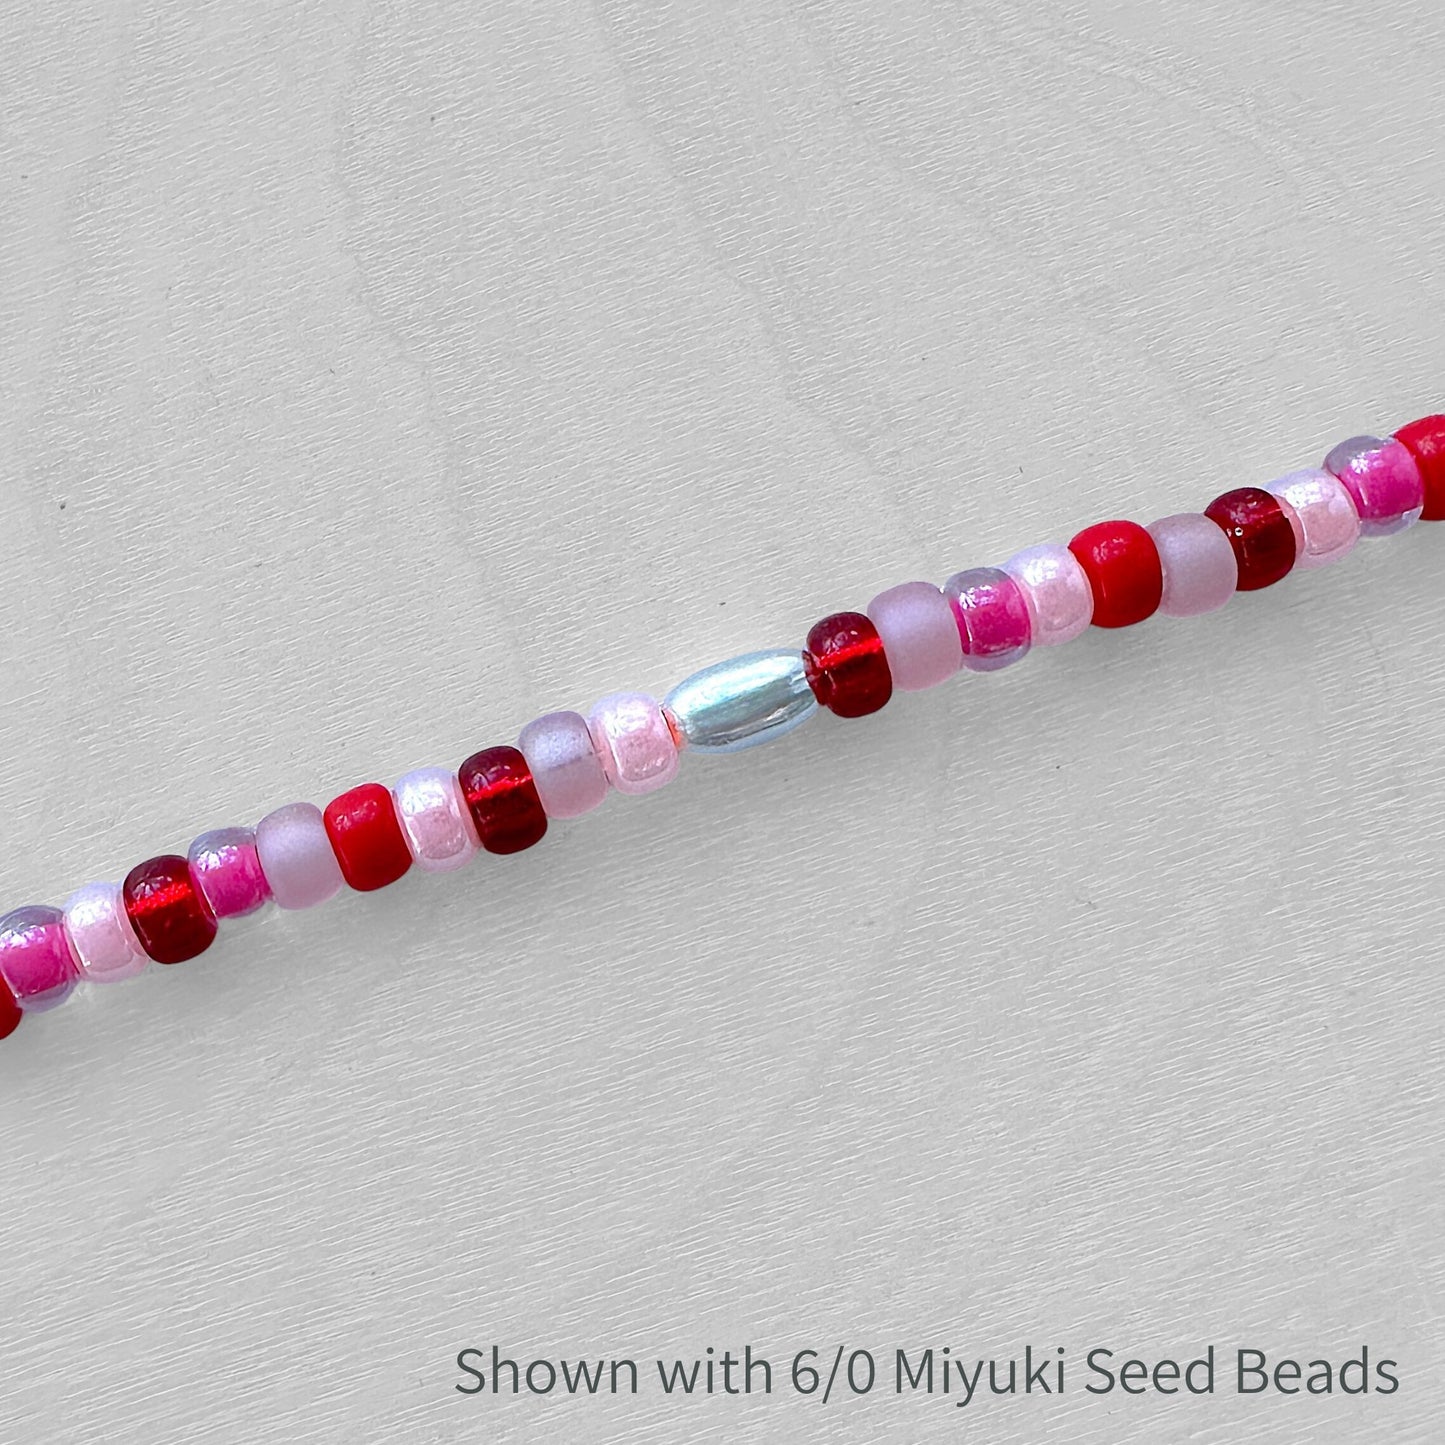 4 x 7mm Sterling Silver Oval Beads - The Bead Mix